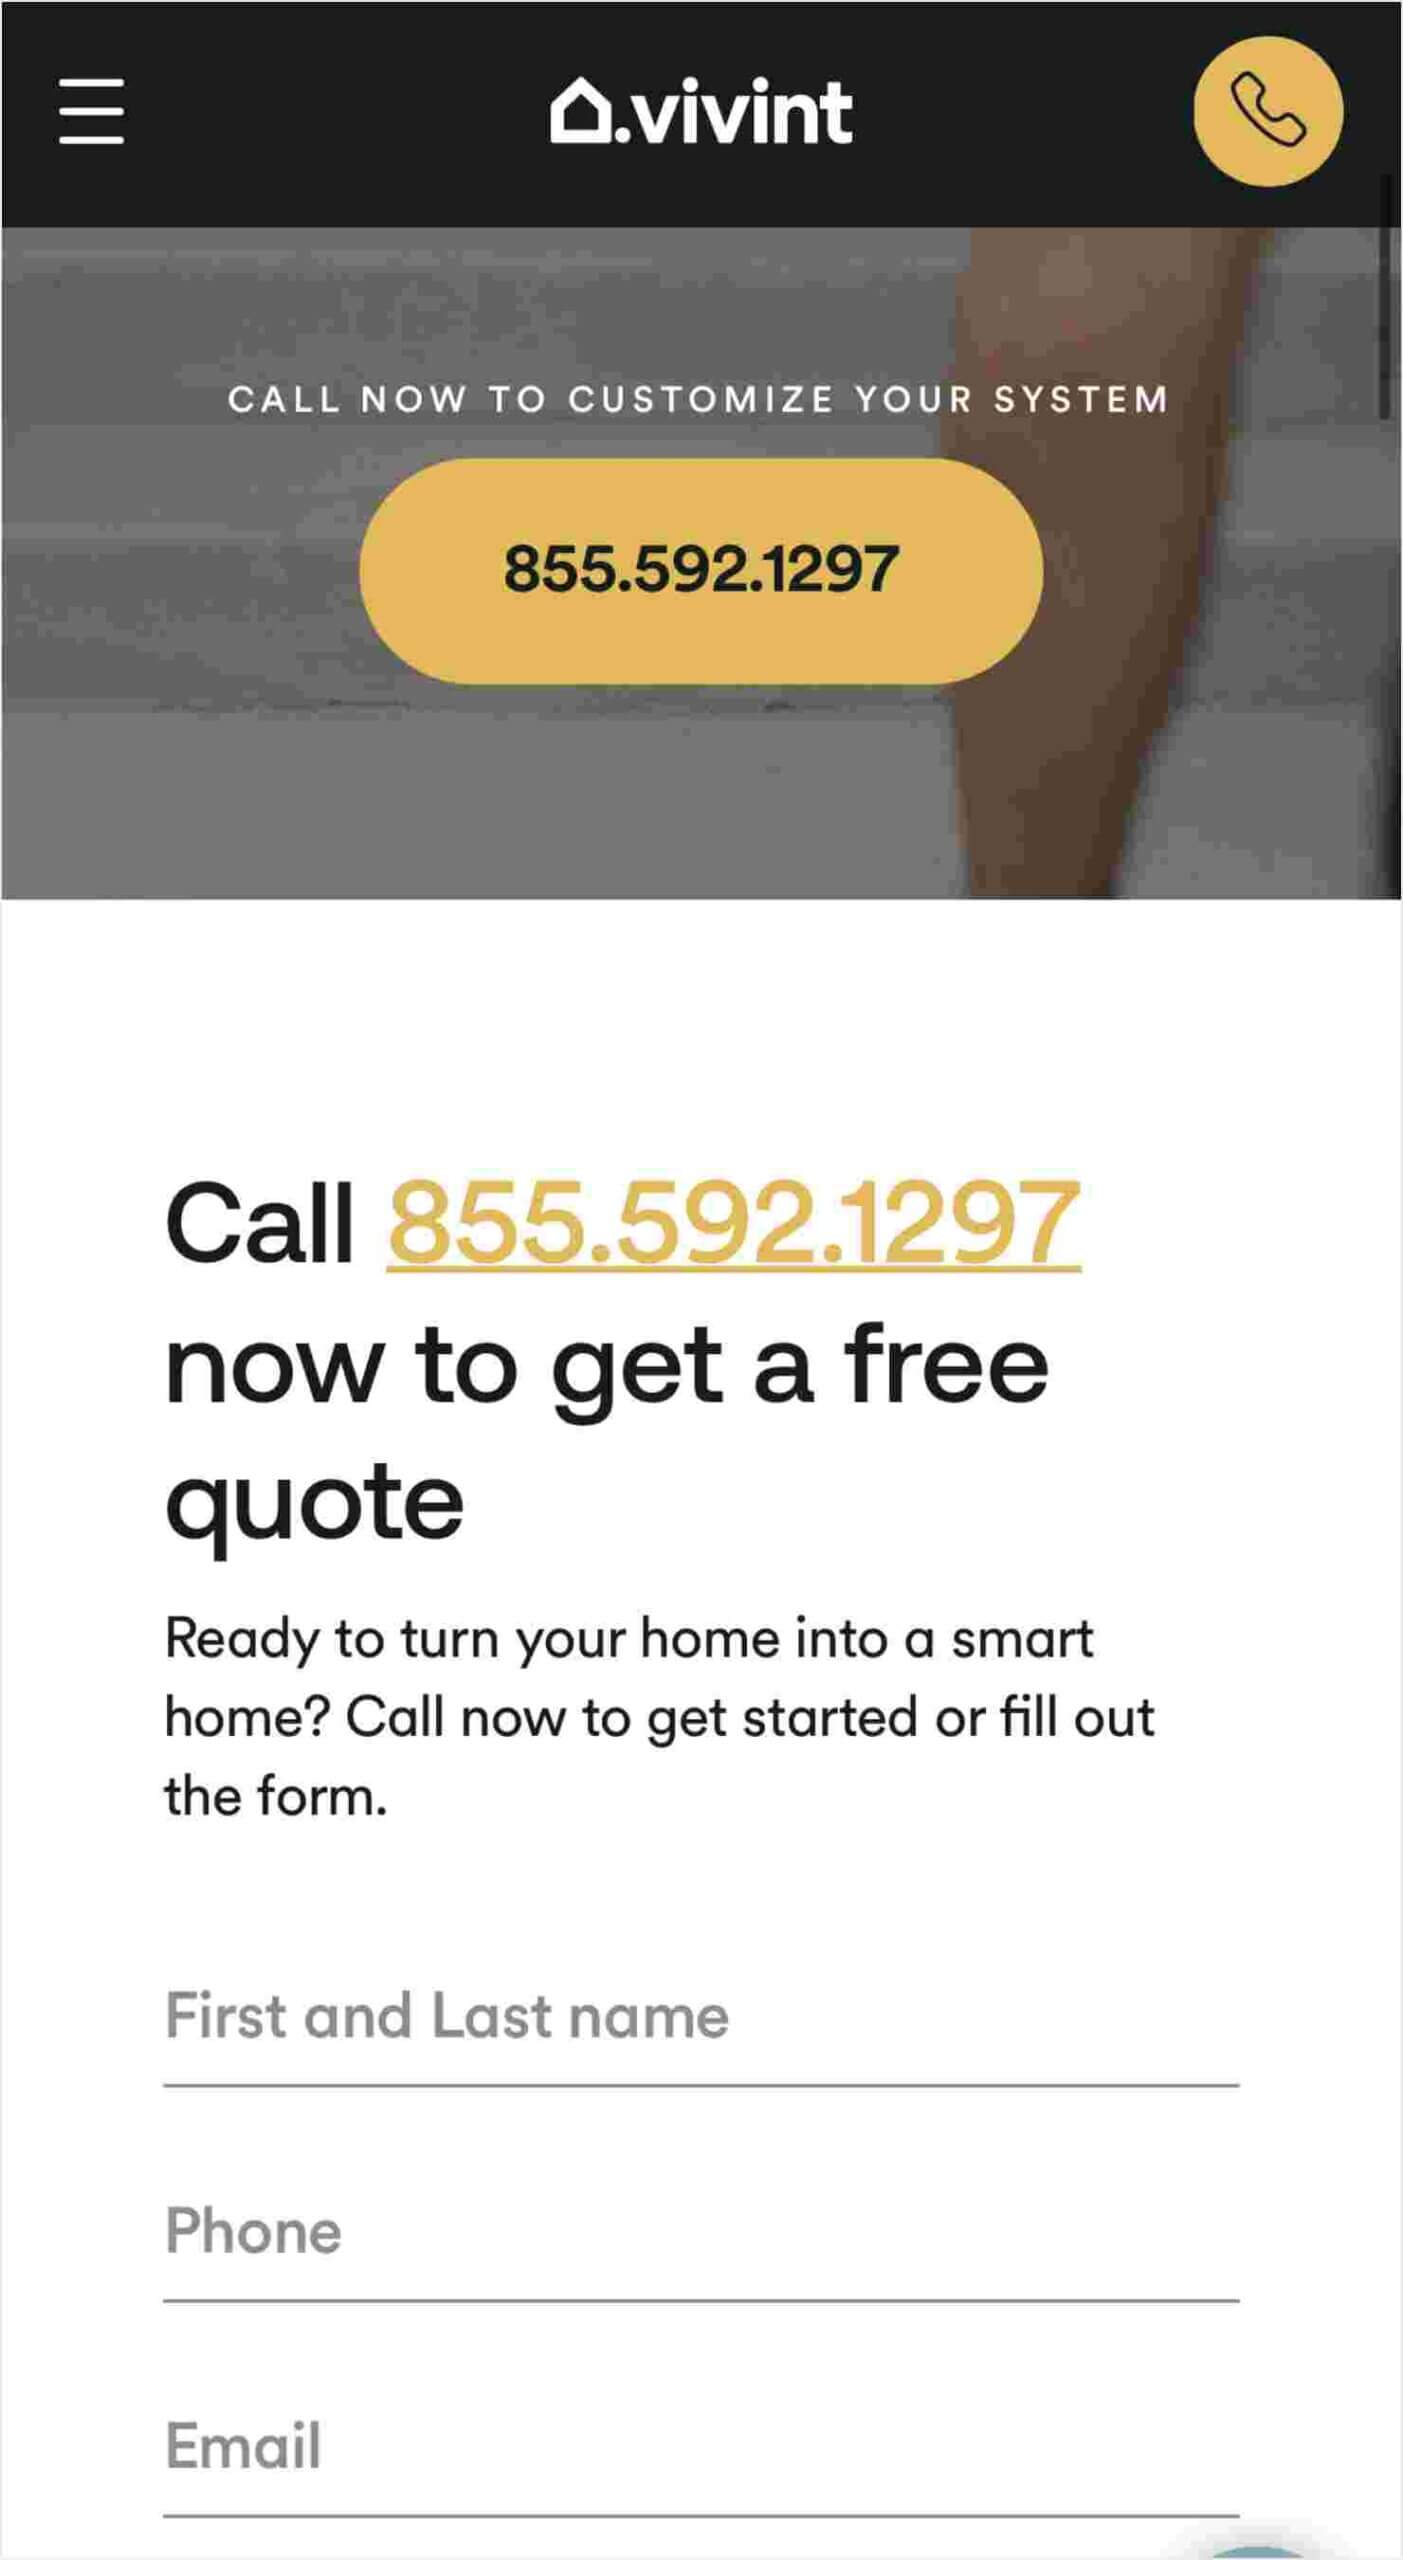 Further down the Vivint mobile landing page, the same header remains at the top of the page. There’s a call-to-action section with a large phone number button for contacting customer service to customize a smart home system. The page features bold text stating 'Call now to get a free quote' followed by a prompt encouraging homeowners to call or fill out a form. A simple form layout below asks for the user's first and last name, phone number, and email address, with each field neatly outlined, ready for the user to input their information.